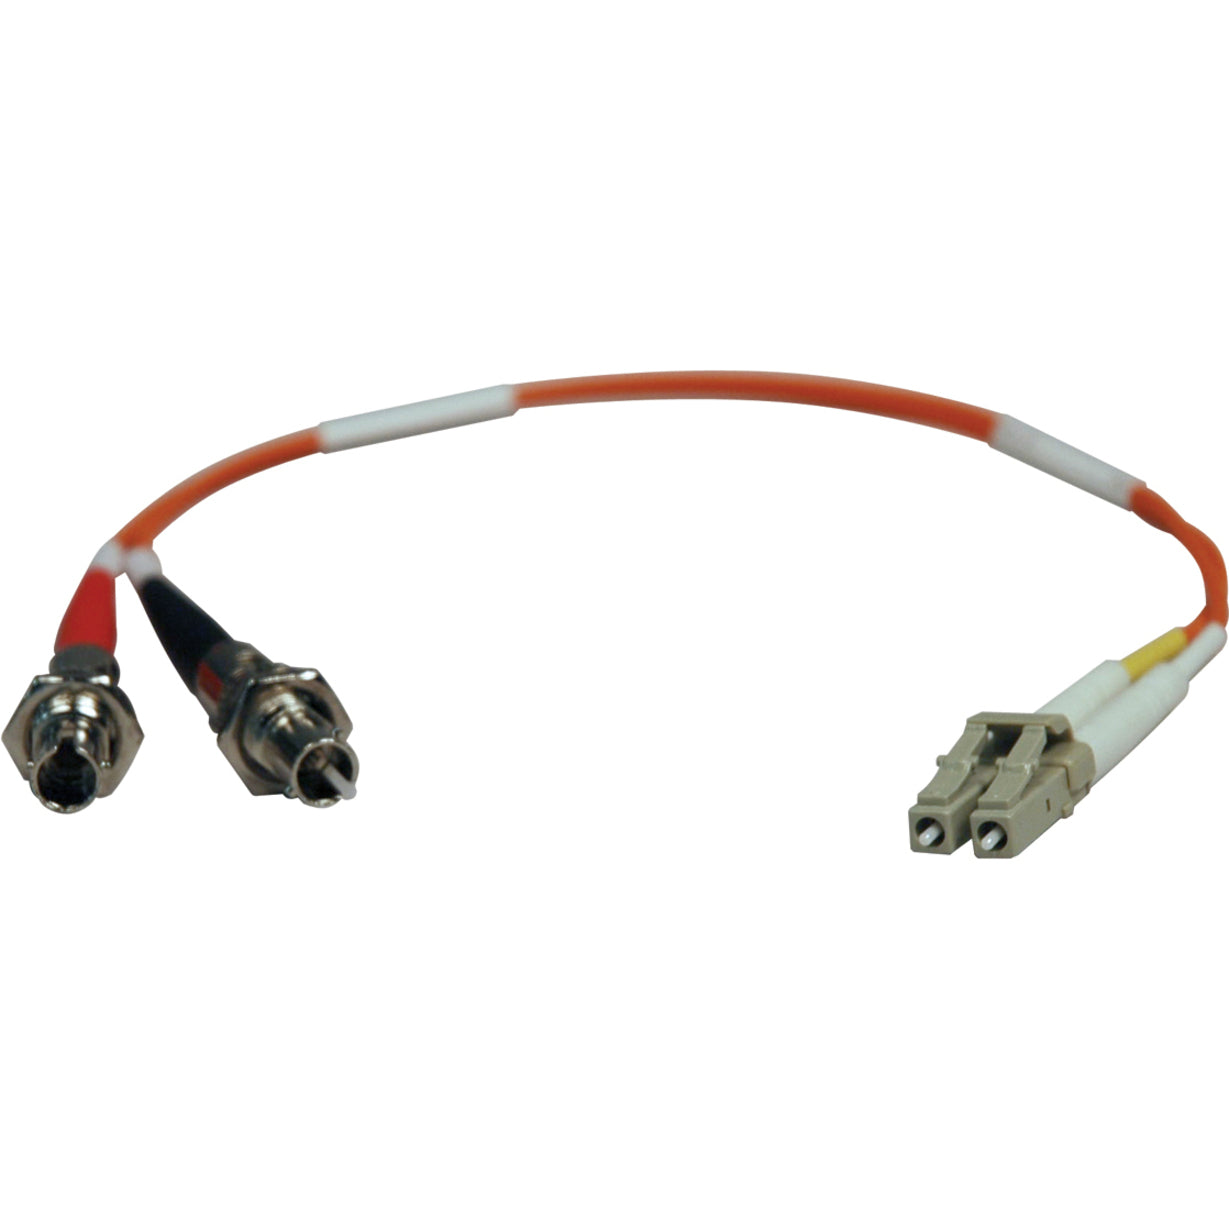 Tripp Lite N457-001-62 Duplex Fiber Optic Cable Adapter, 1 ft Multi-mode LC/ST Adapter Cable